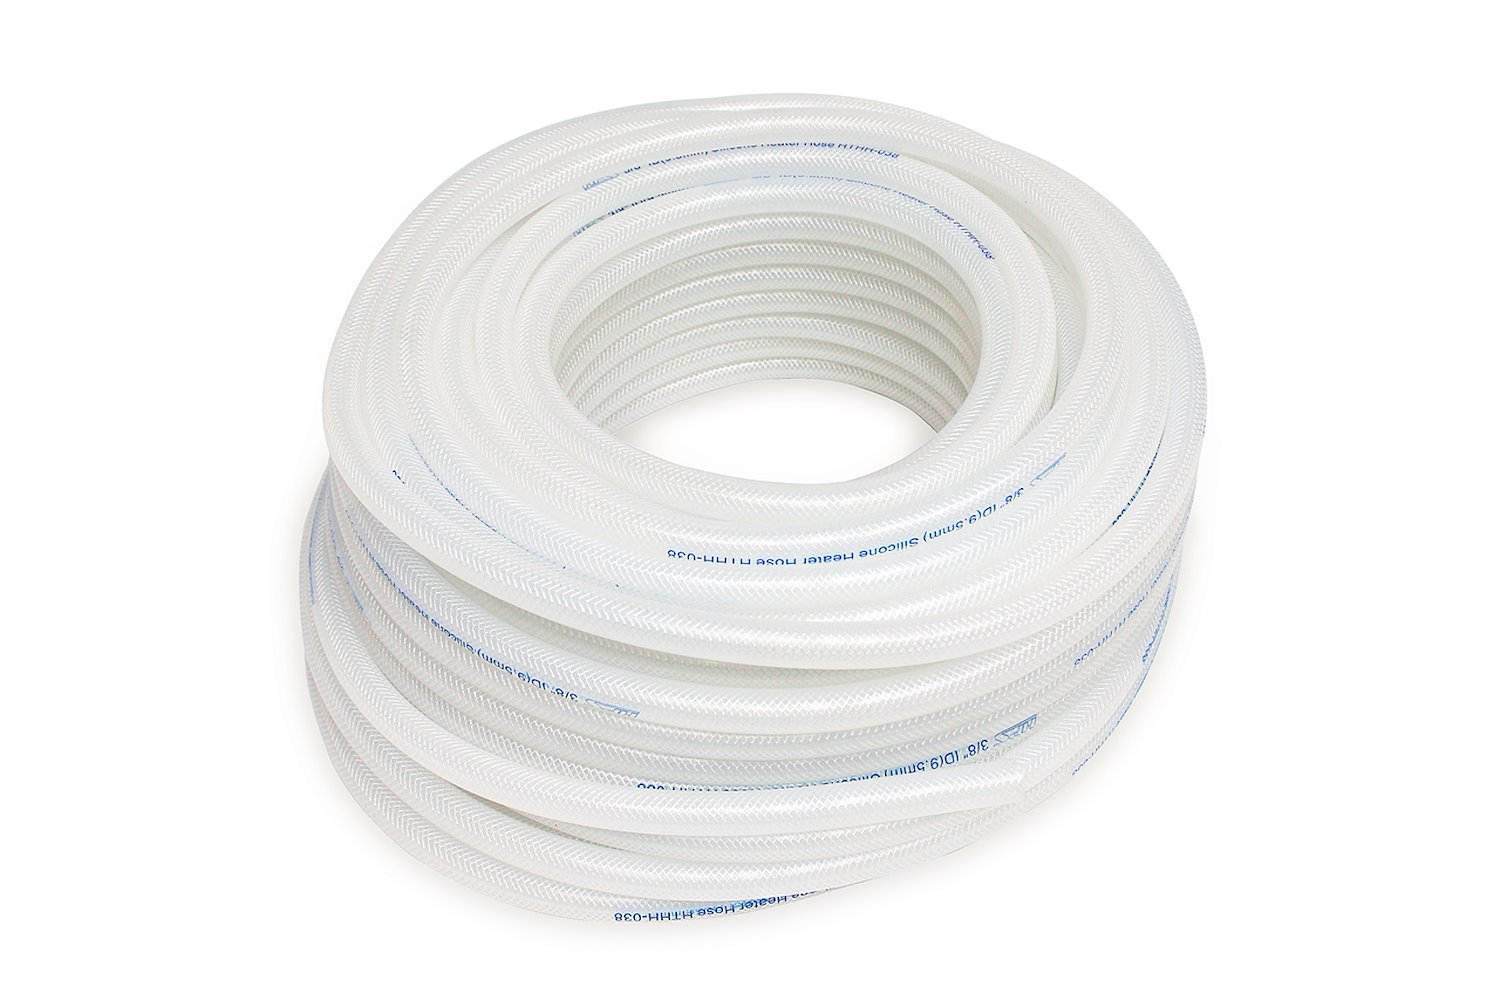 HTHH-087-CLEARx100 Silicone Heater Hose Tubing, High-Temp Reinforced, 7/8 in. ID, 100 ft. Roll, Clear